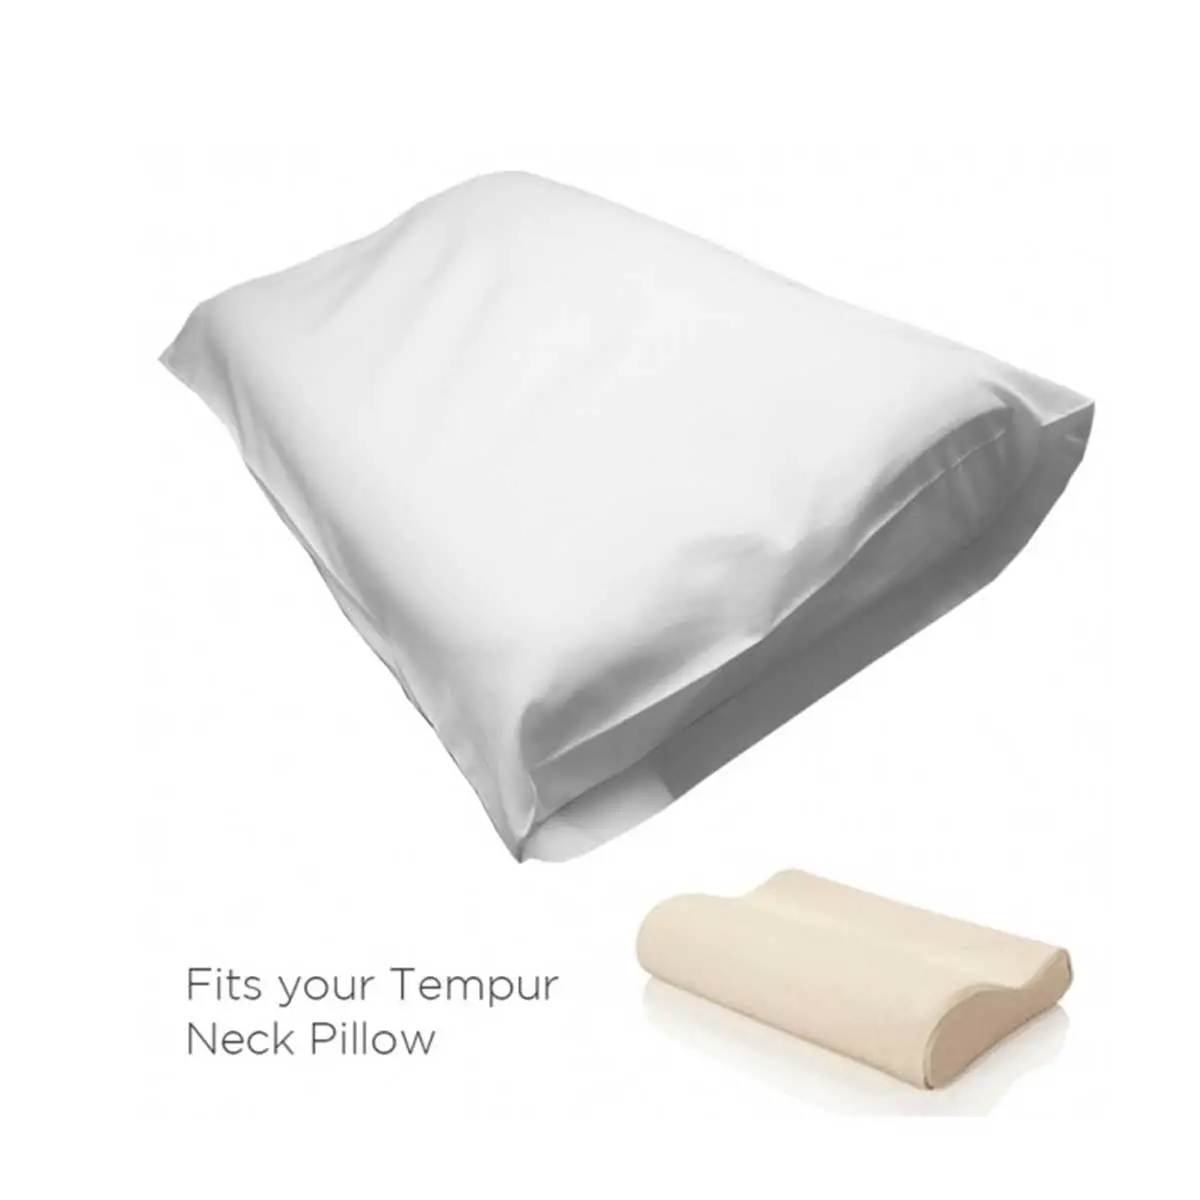 [Download 40+] Tempur Pedic Neck Pillow How To Use